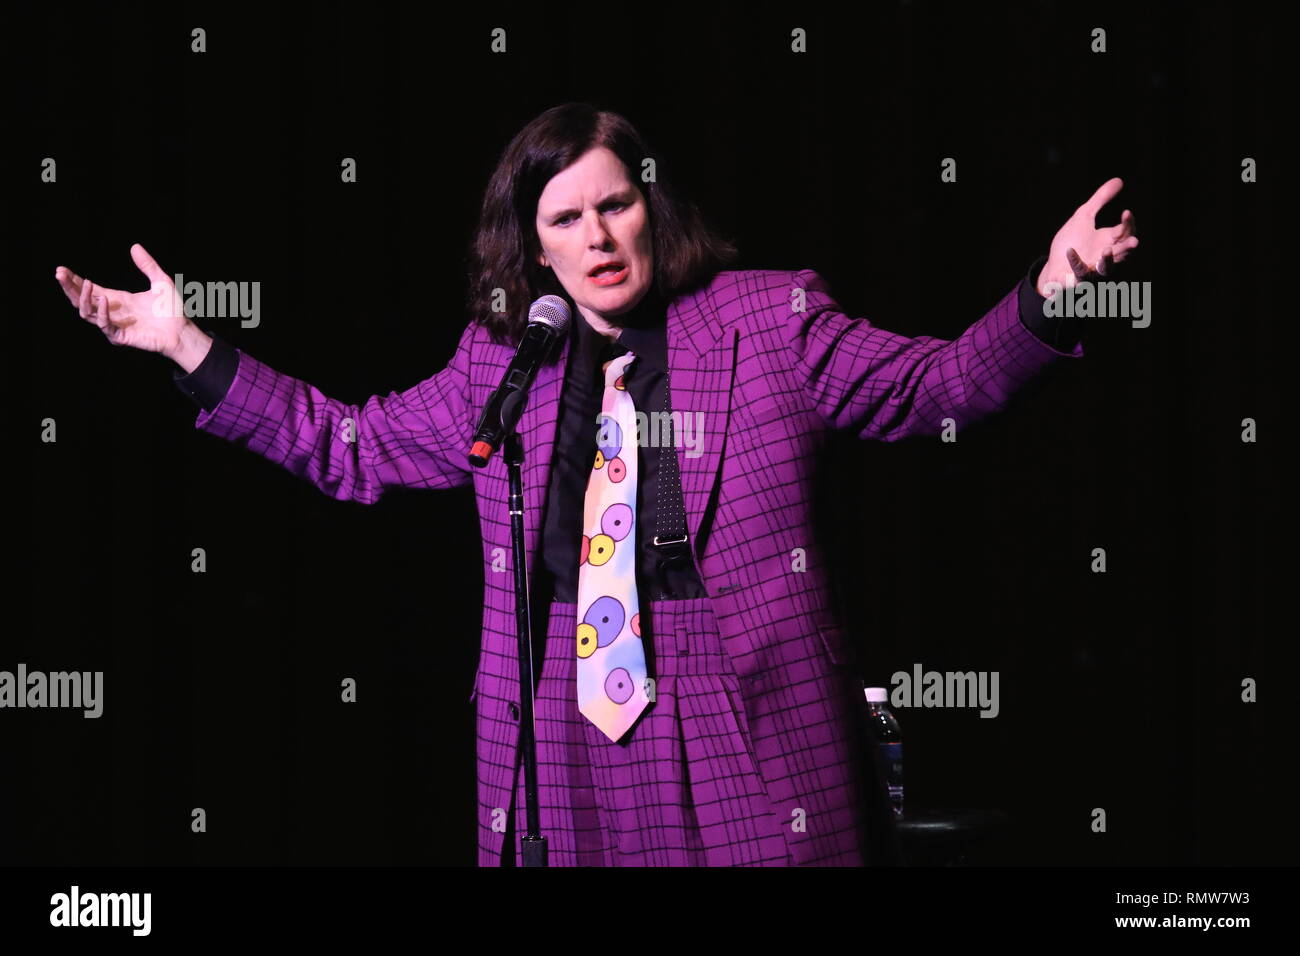 Comedian, author, actress, interviewer and commentator Paula Poundstone is shown performing on stage during a 'live' concert appearance Stock Photo